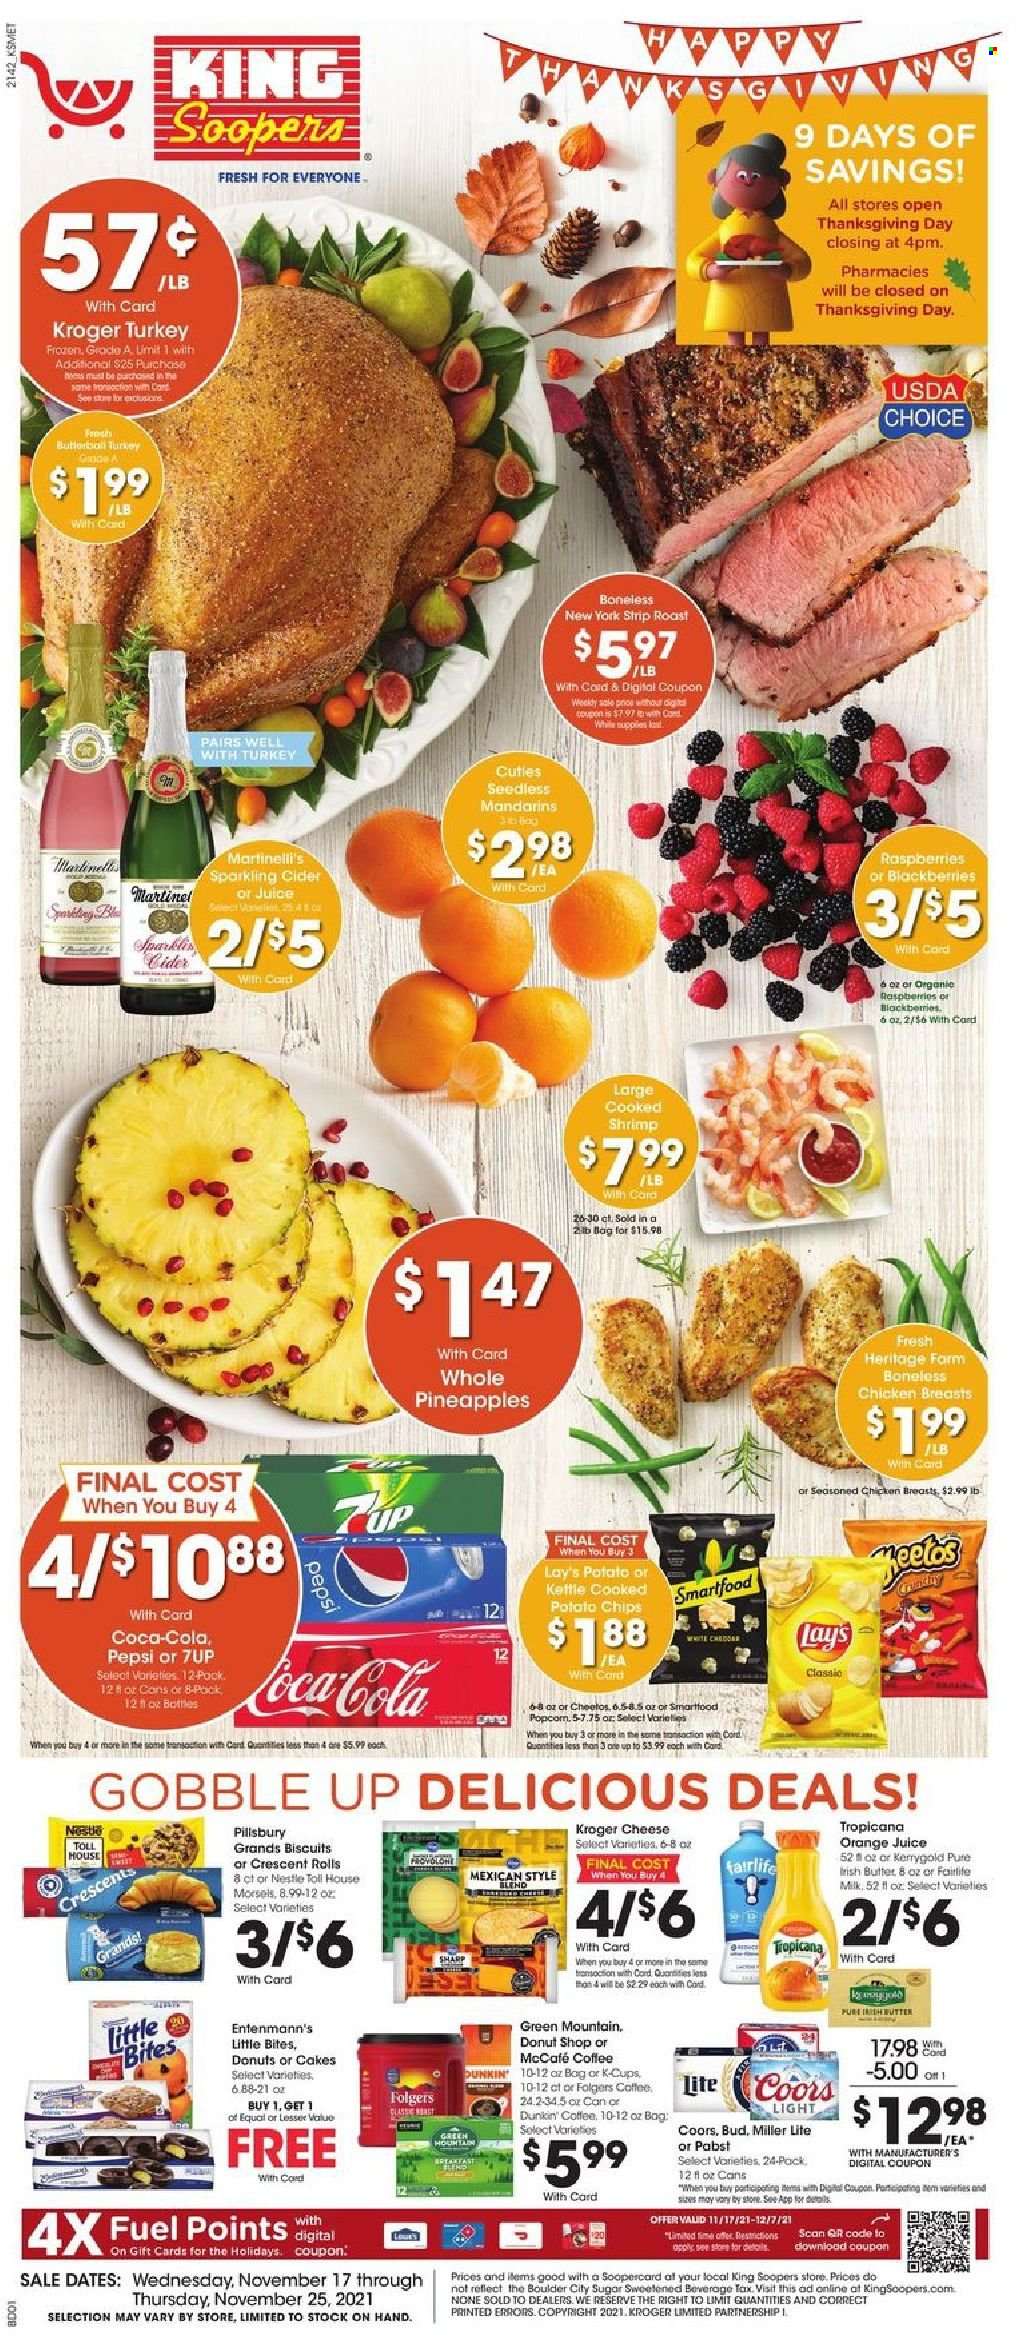 thumbnail - King Soopers Flyer - 11/17/2021 - 11/25/2021 - Sales products - cake, crescent rolls, Entenmann's, blackberries, mandarines, pineapple, shrimps, cheese, butter, Nestlé, biscuit, Little Bites, potato chips, Cheetos, Lay’s, Smartfood, popcorn, Coca-Cola, Pepsi, orange juice, juice, 7UP, coffee, Folgers, coffee capsules, L'Or, K-Cups, Green Mountain, sparkling cider, sparkling wine, cider, beer, chicken breasts, Sharp, Miller Lite, Coors. Page 1.